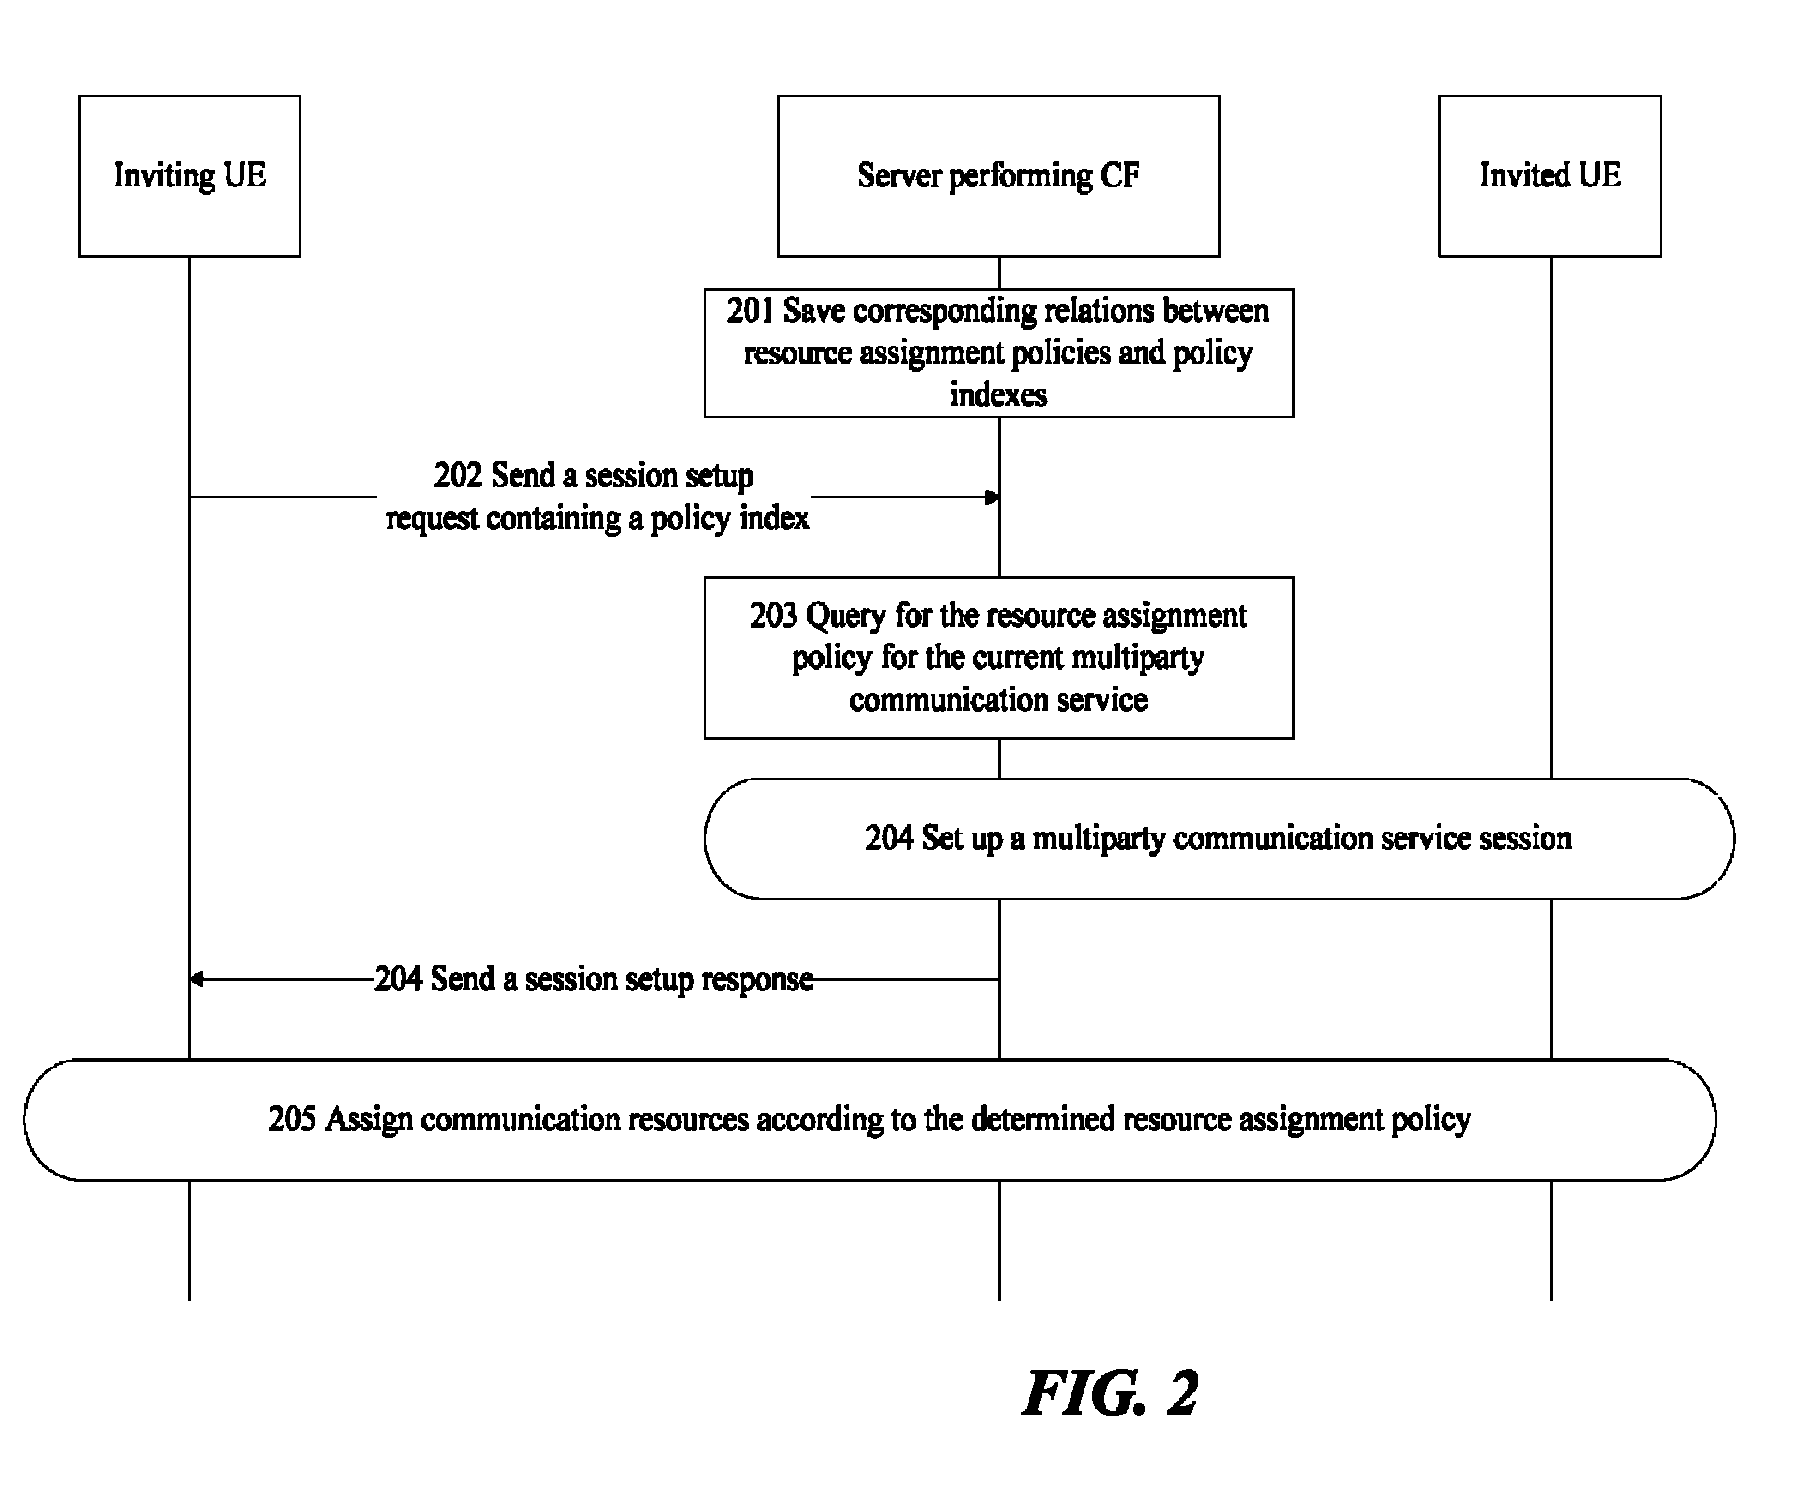 Method for managing requests for multiparty session setup according to determined resource assignment policy